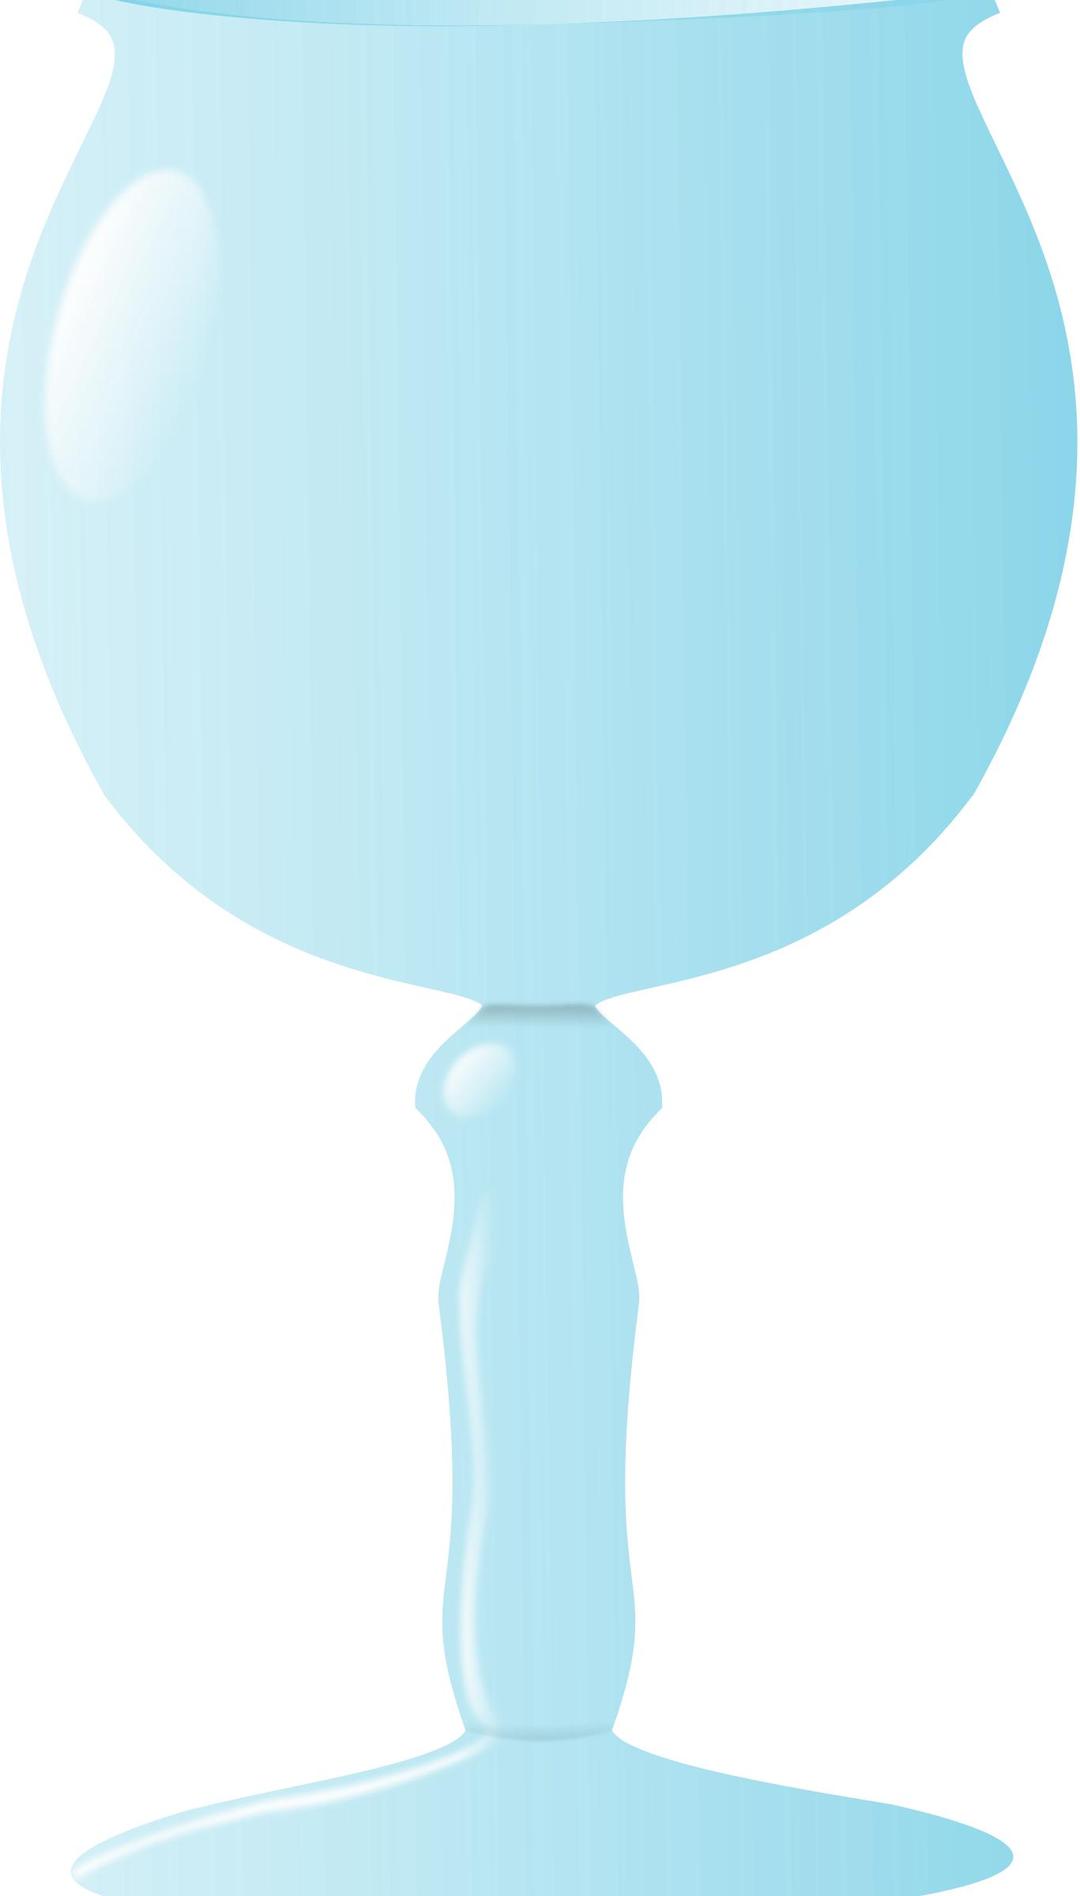 Simple wine glass png transparent